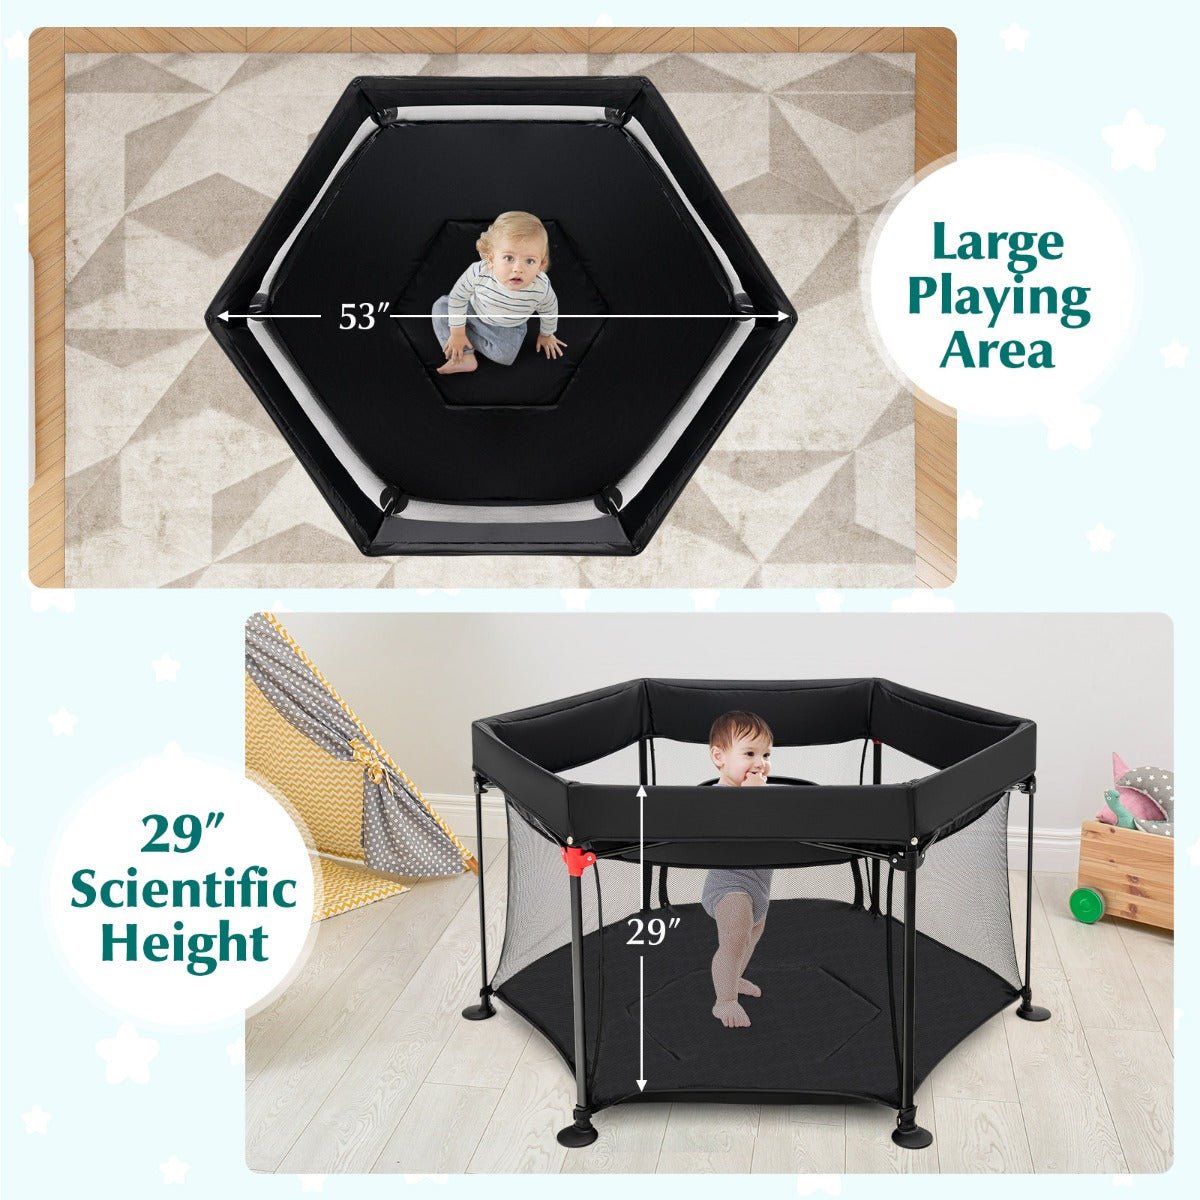 Portable Baby Playpen with Black Removable Canopy: Ideal for Indoor & Outdoor